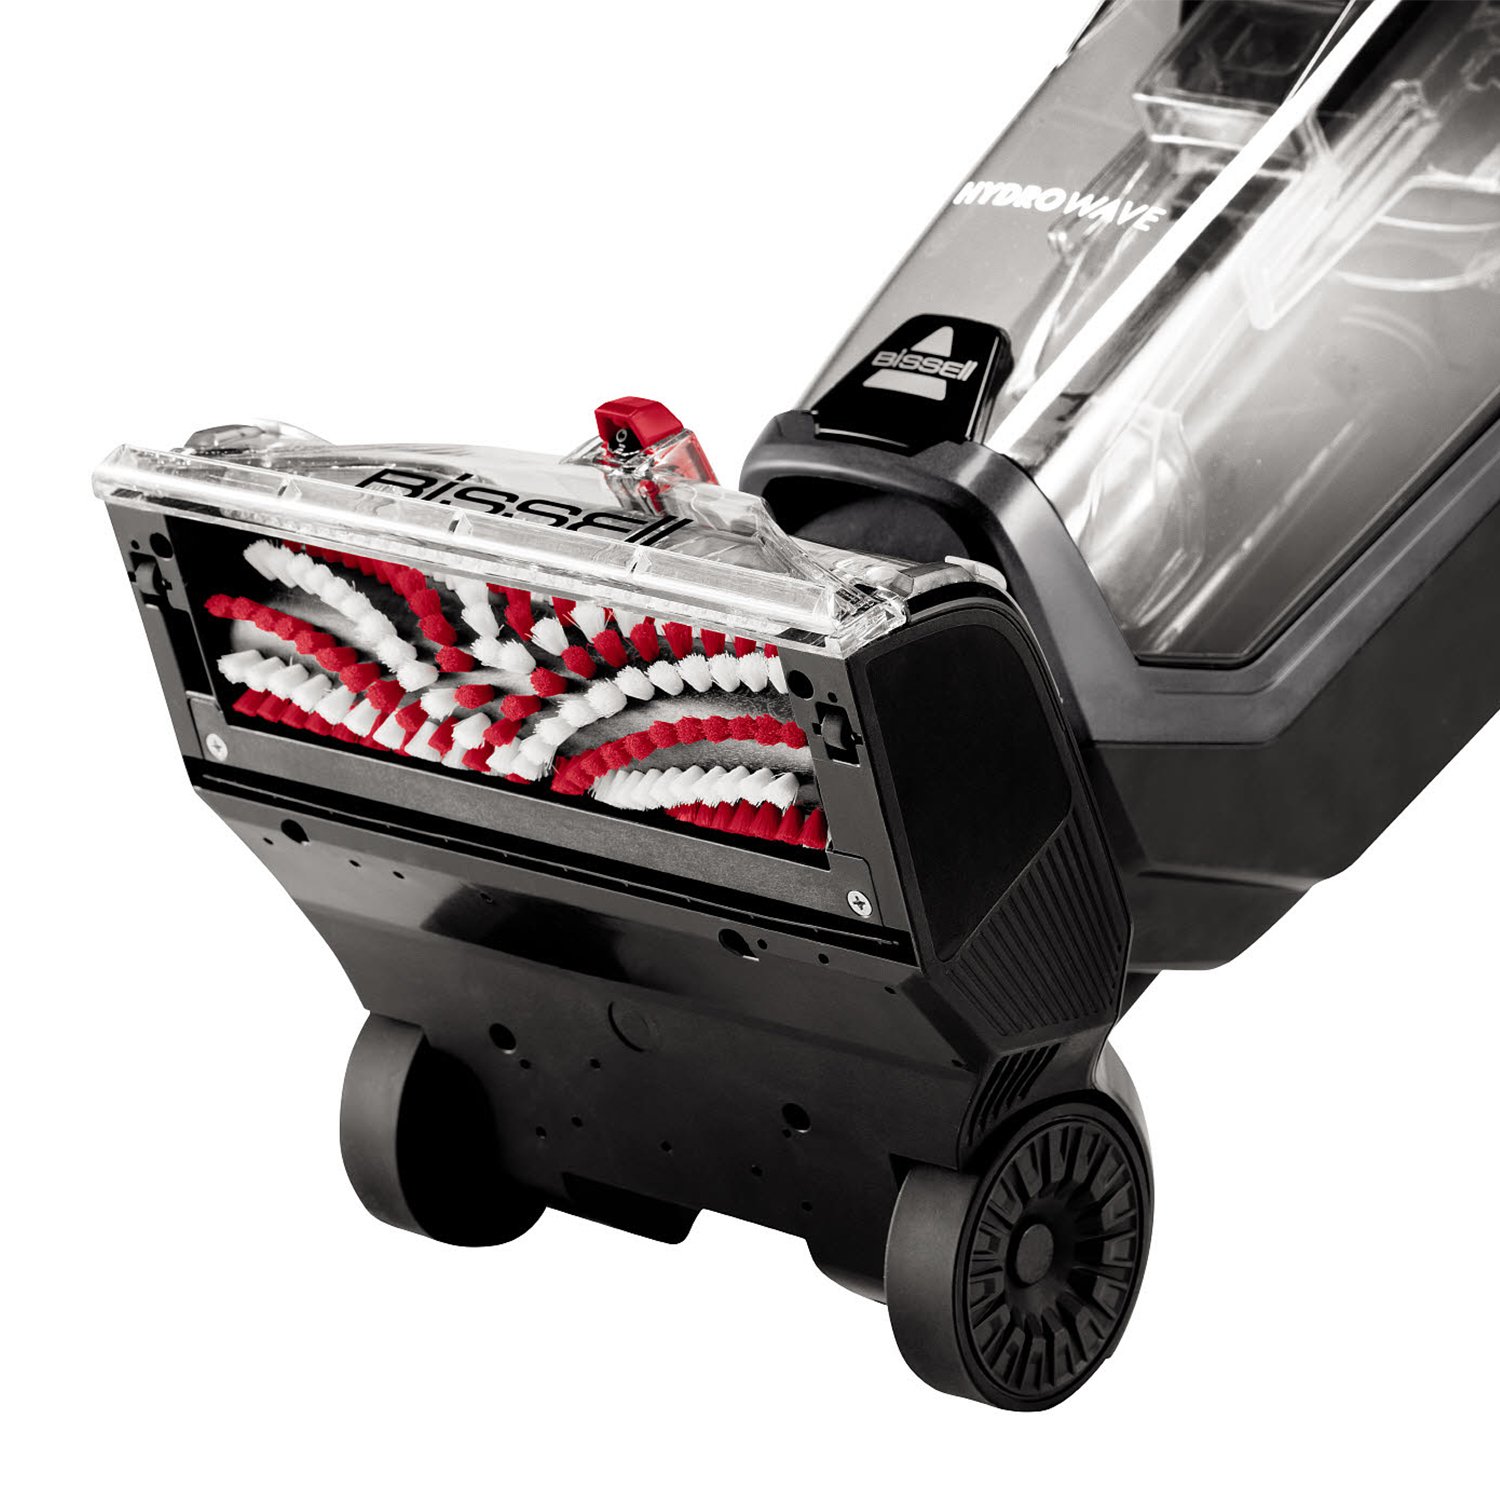 Bissell 2571E HydroWave Compact Carpet Cleaner Review